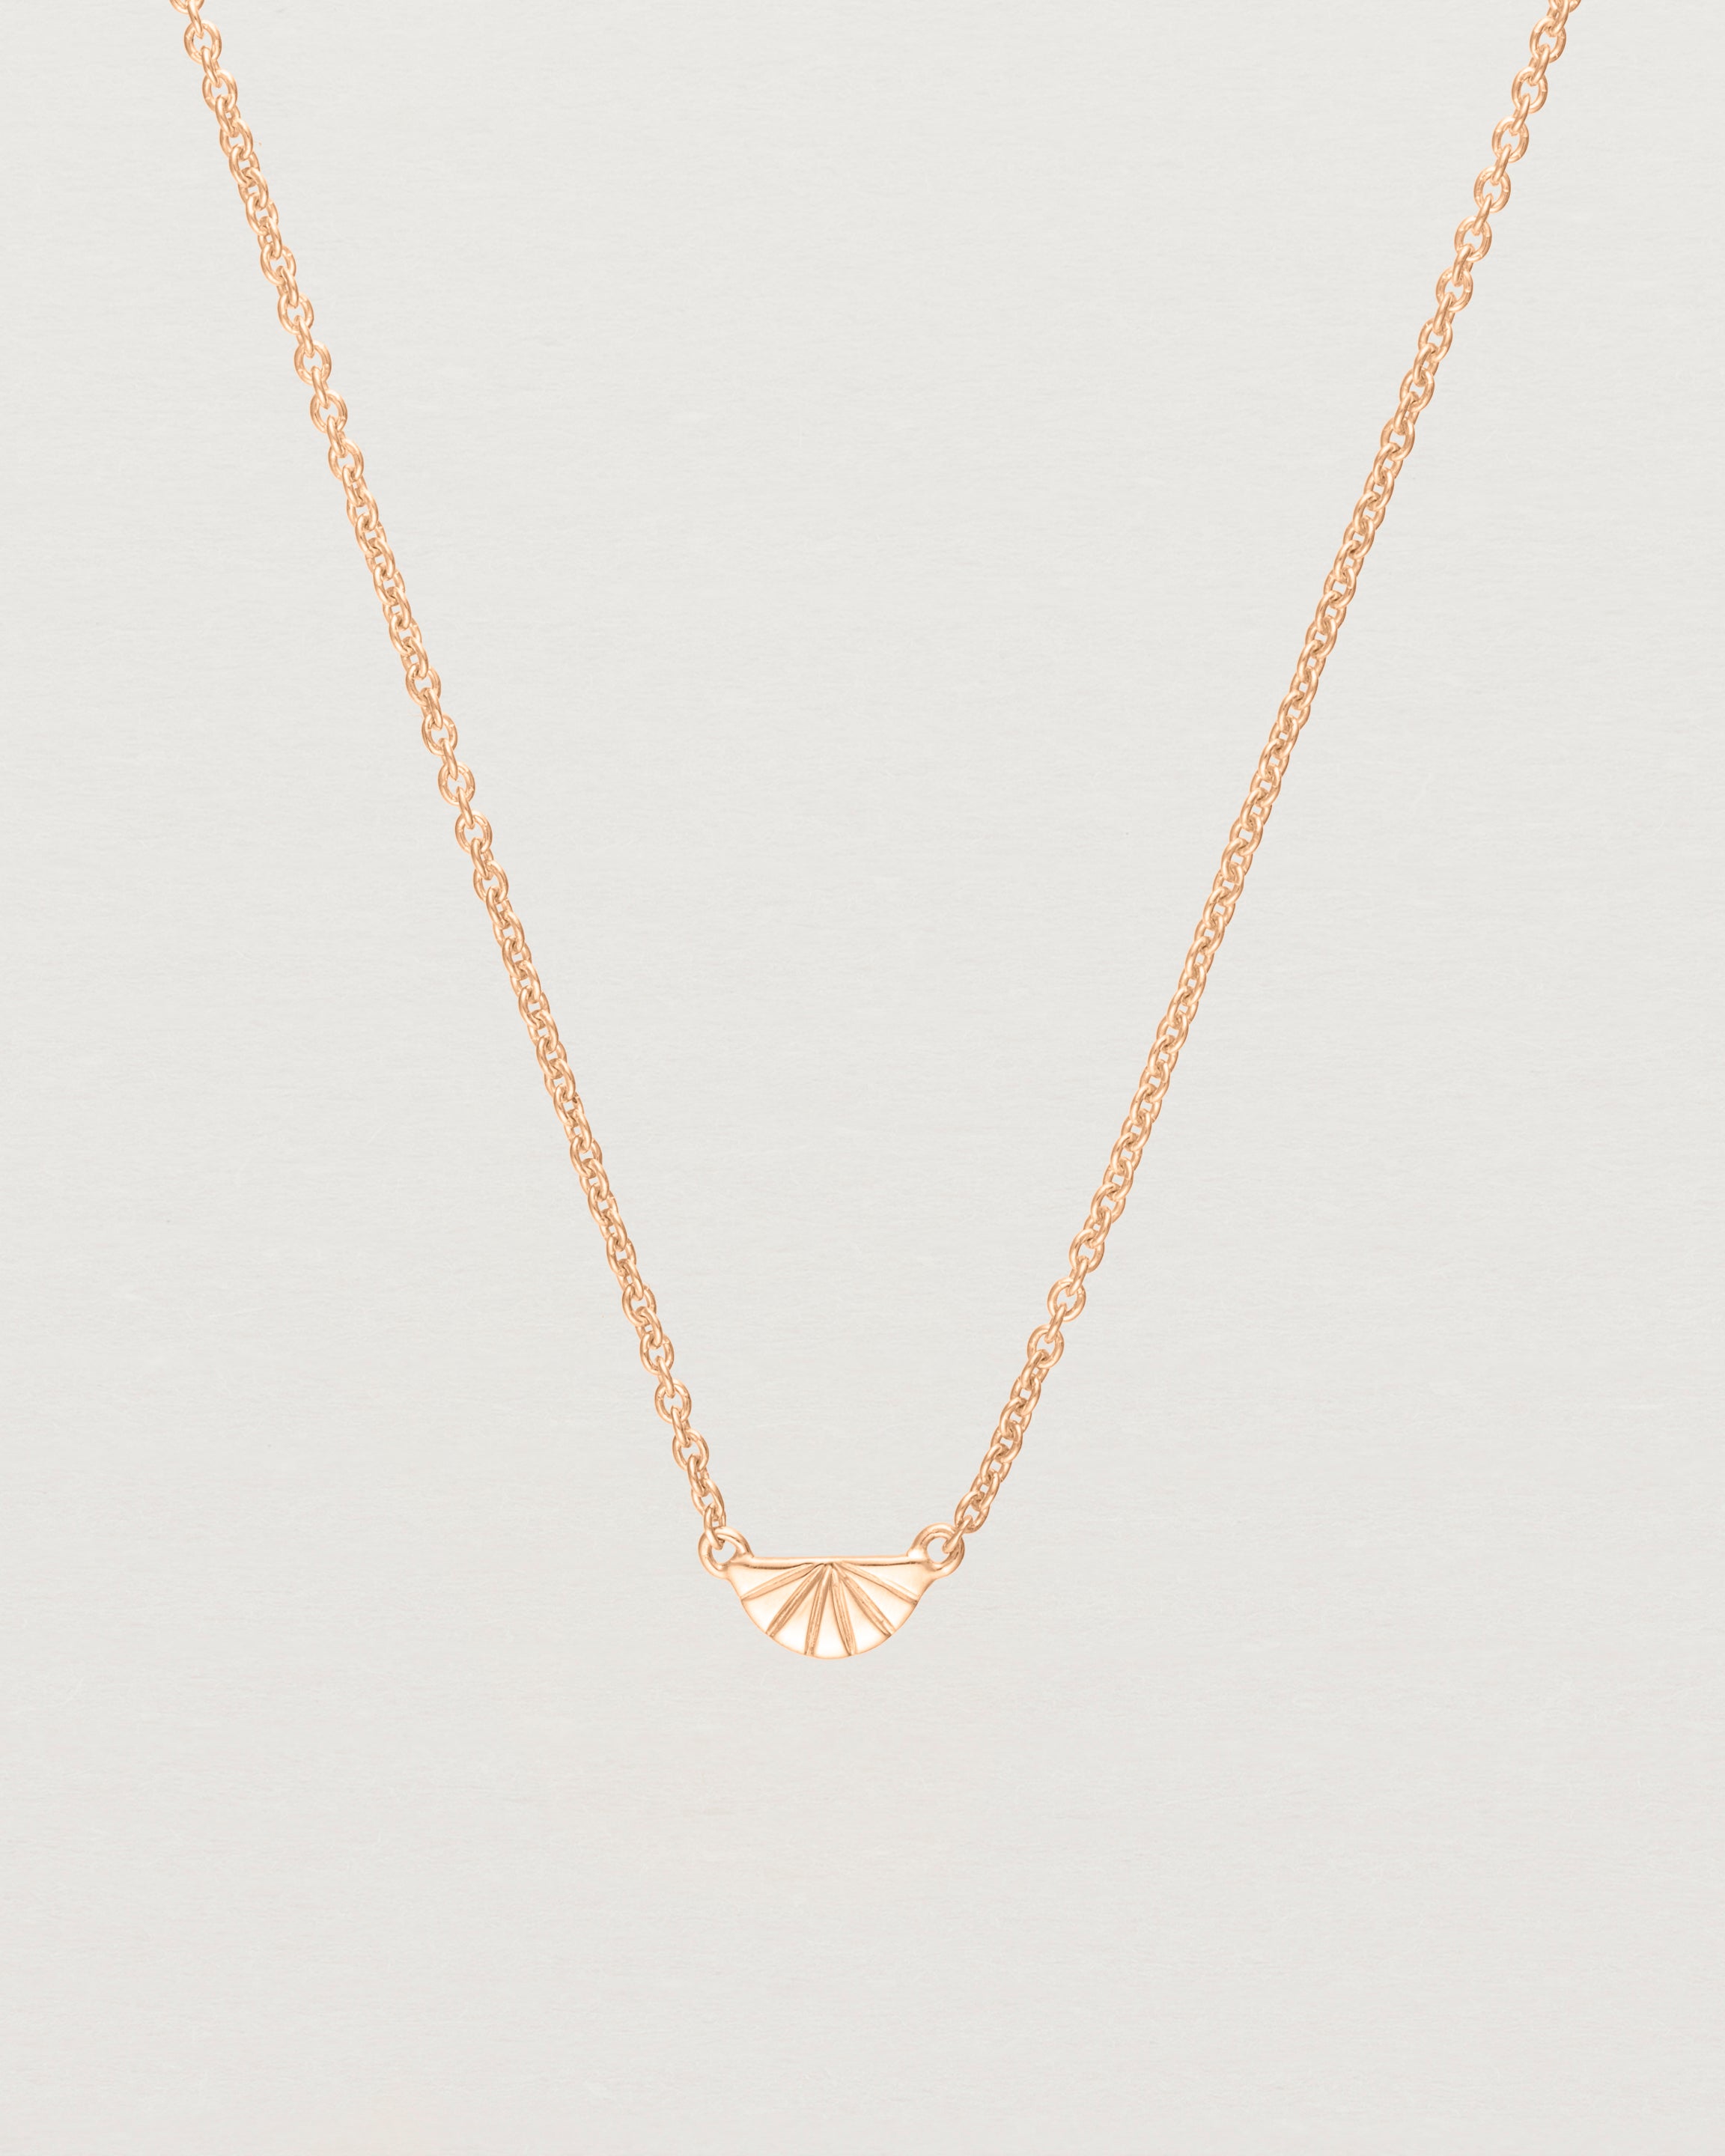 Close up of the Jia Necklace in Rose Gold.